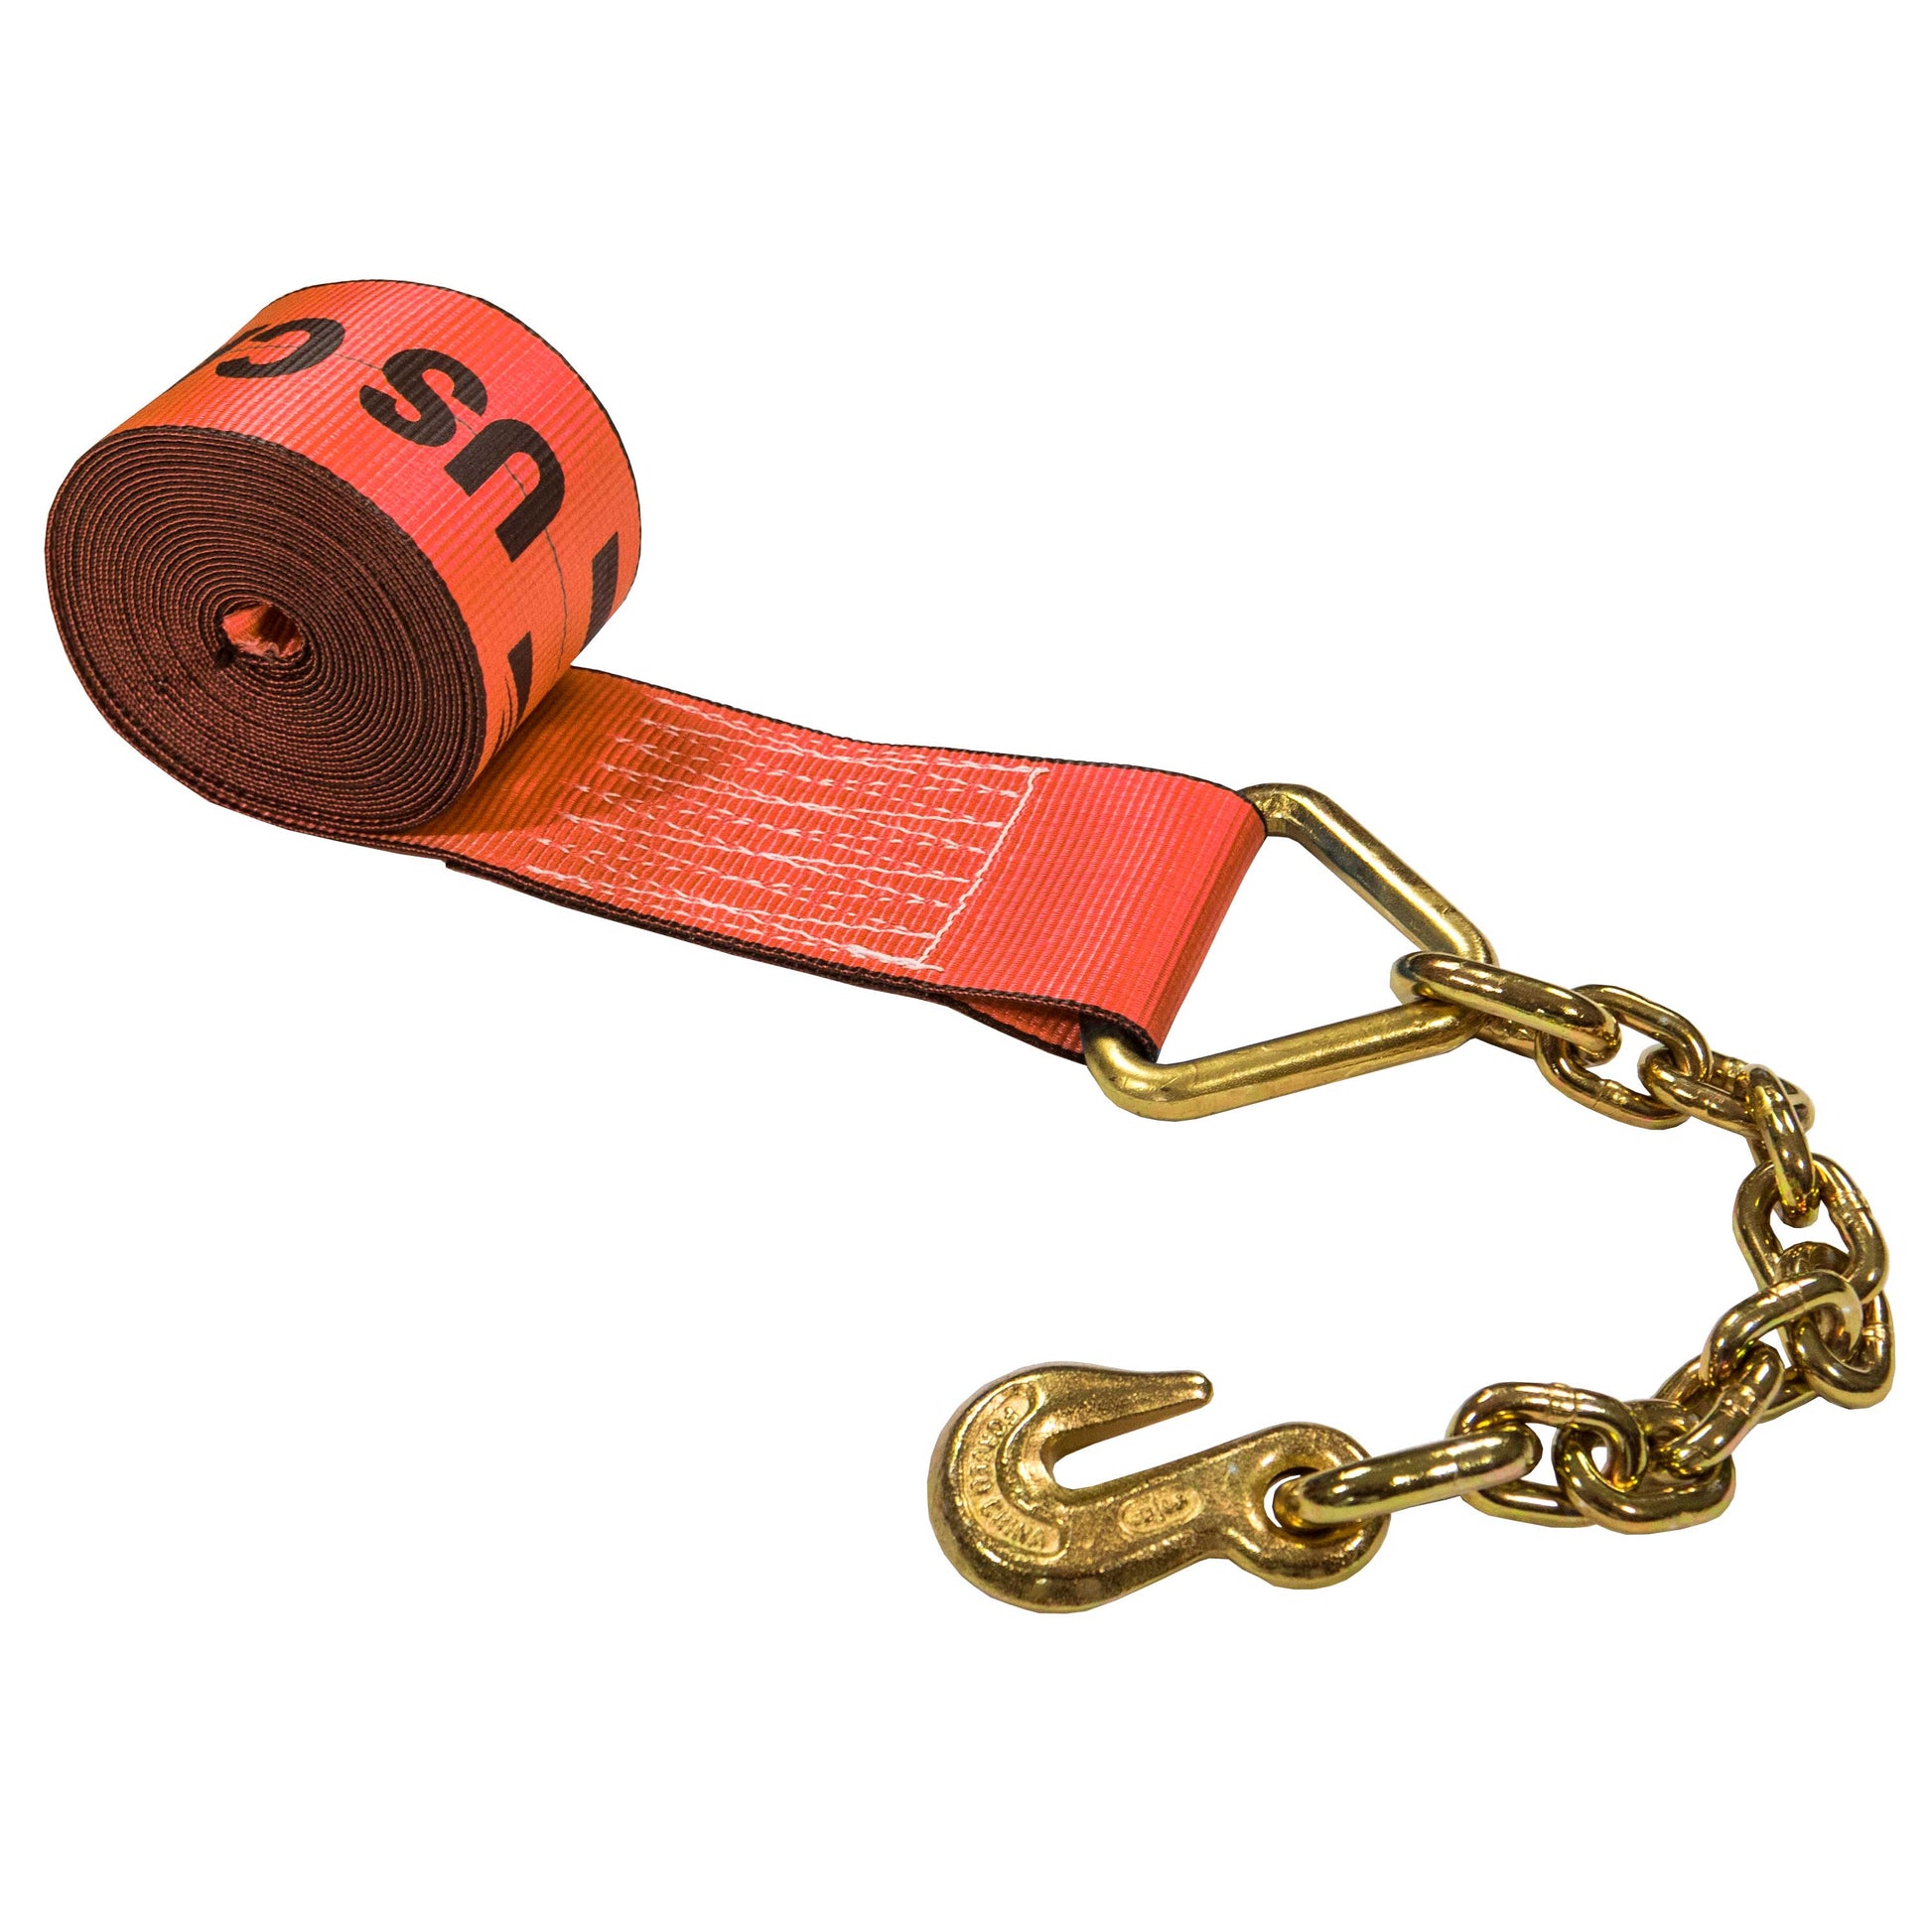 50' 4" heavy-duty red chain extension winch strap